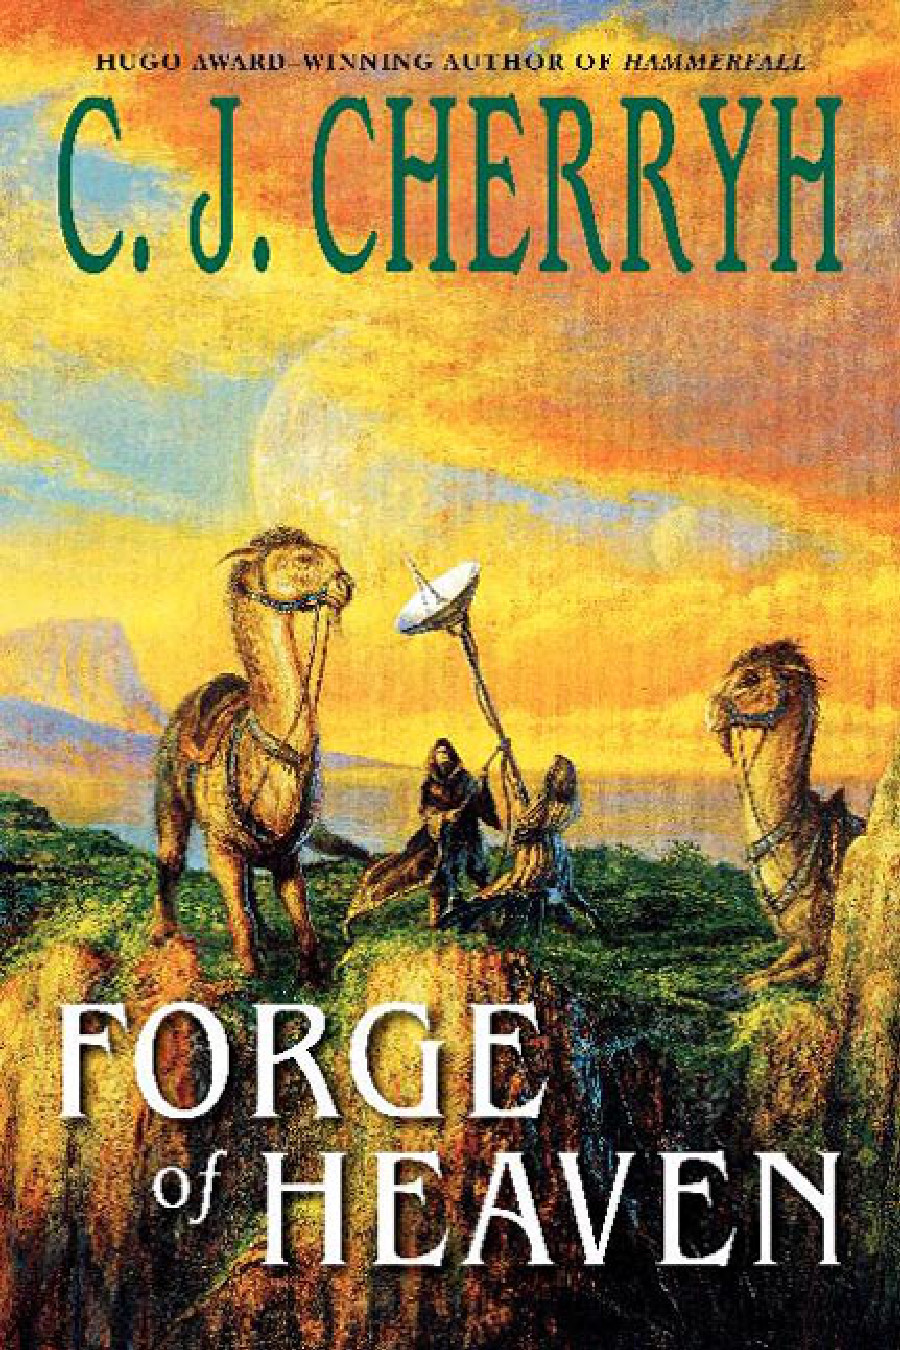 Forge of Heaven by C J Cherryh